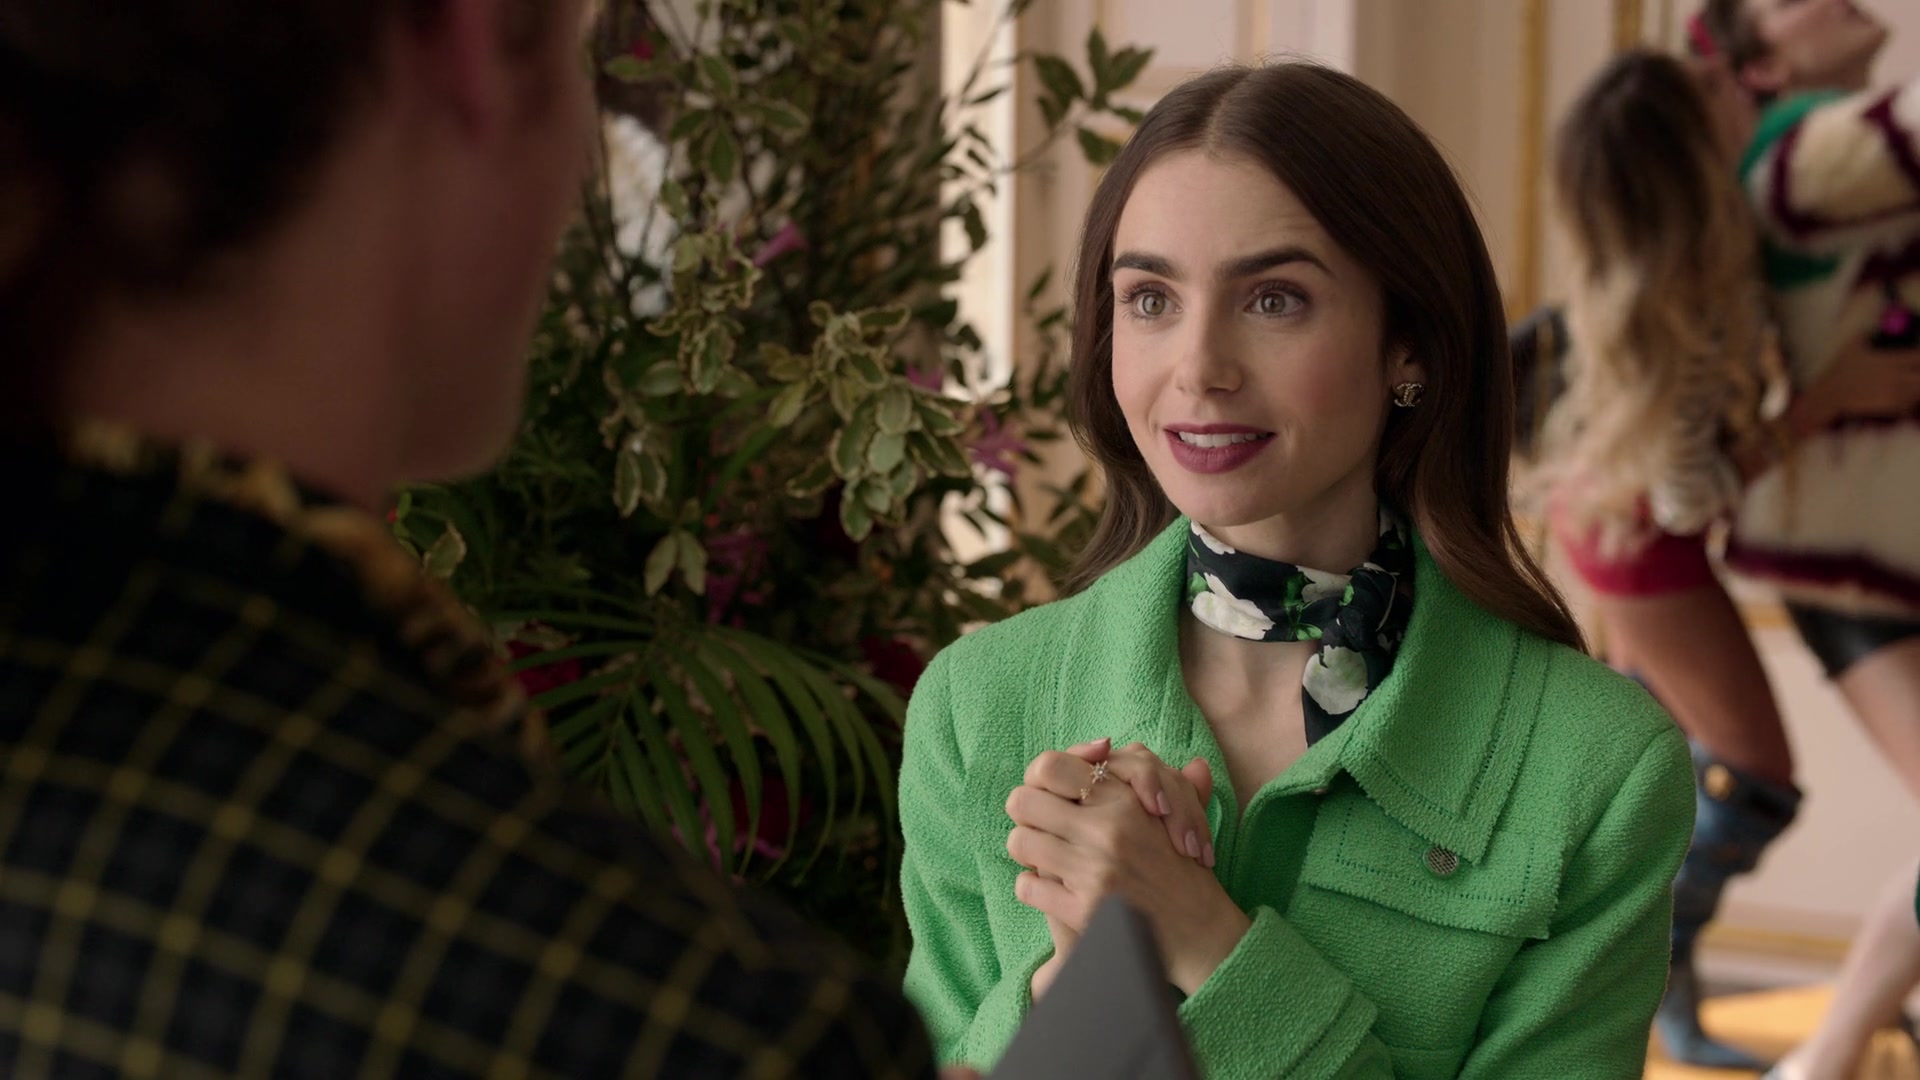 Chanel Earrings Of Lily Collins In Emily In Paris S01E05 Faux Amis (2020)